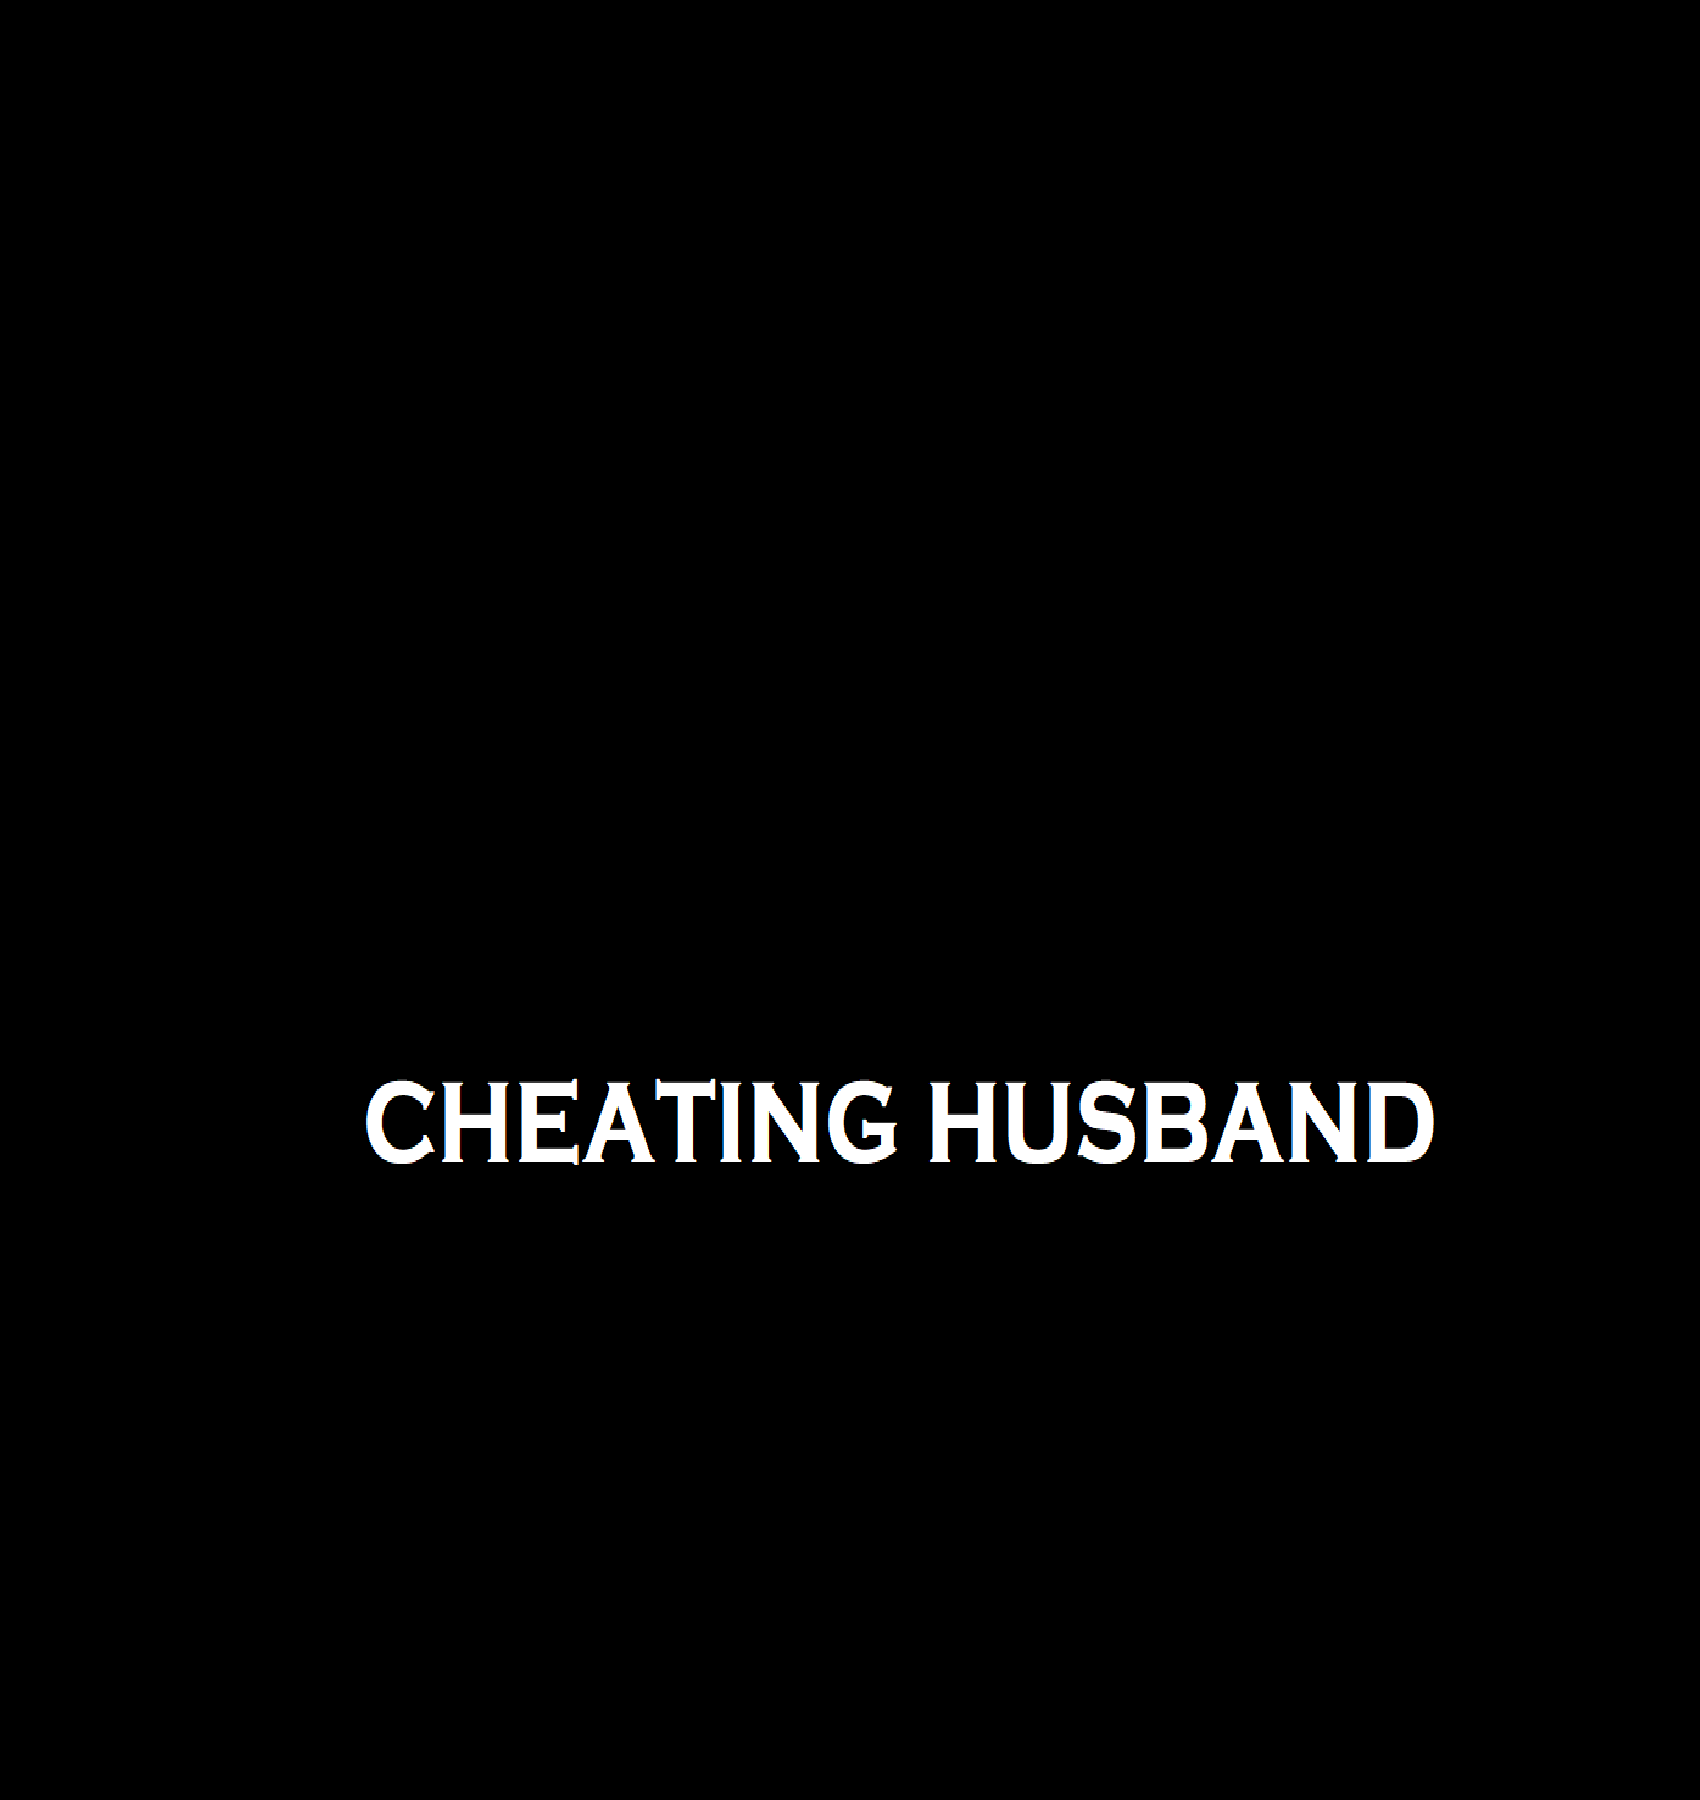 Cheating Husband by Seden